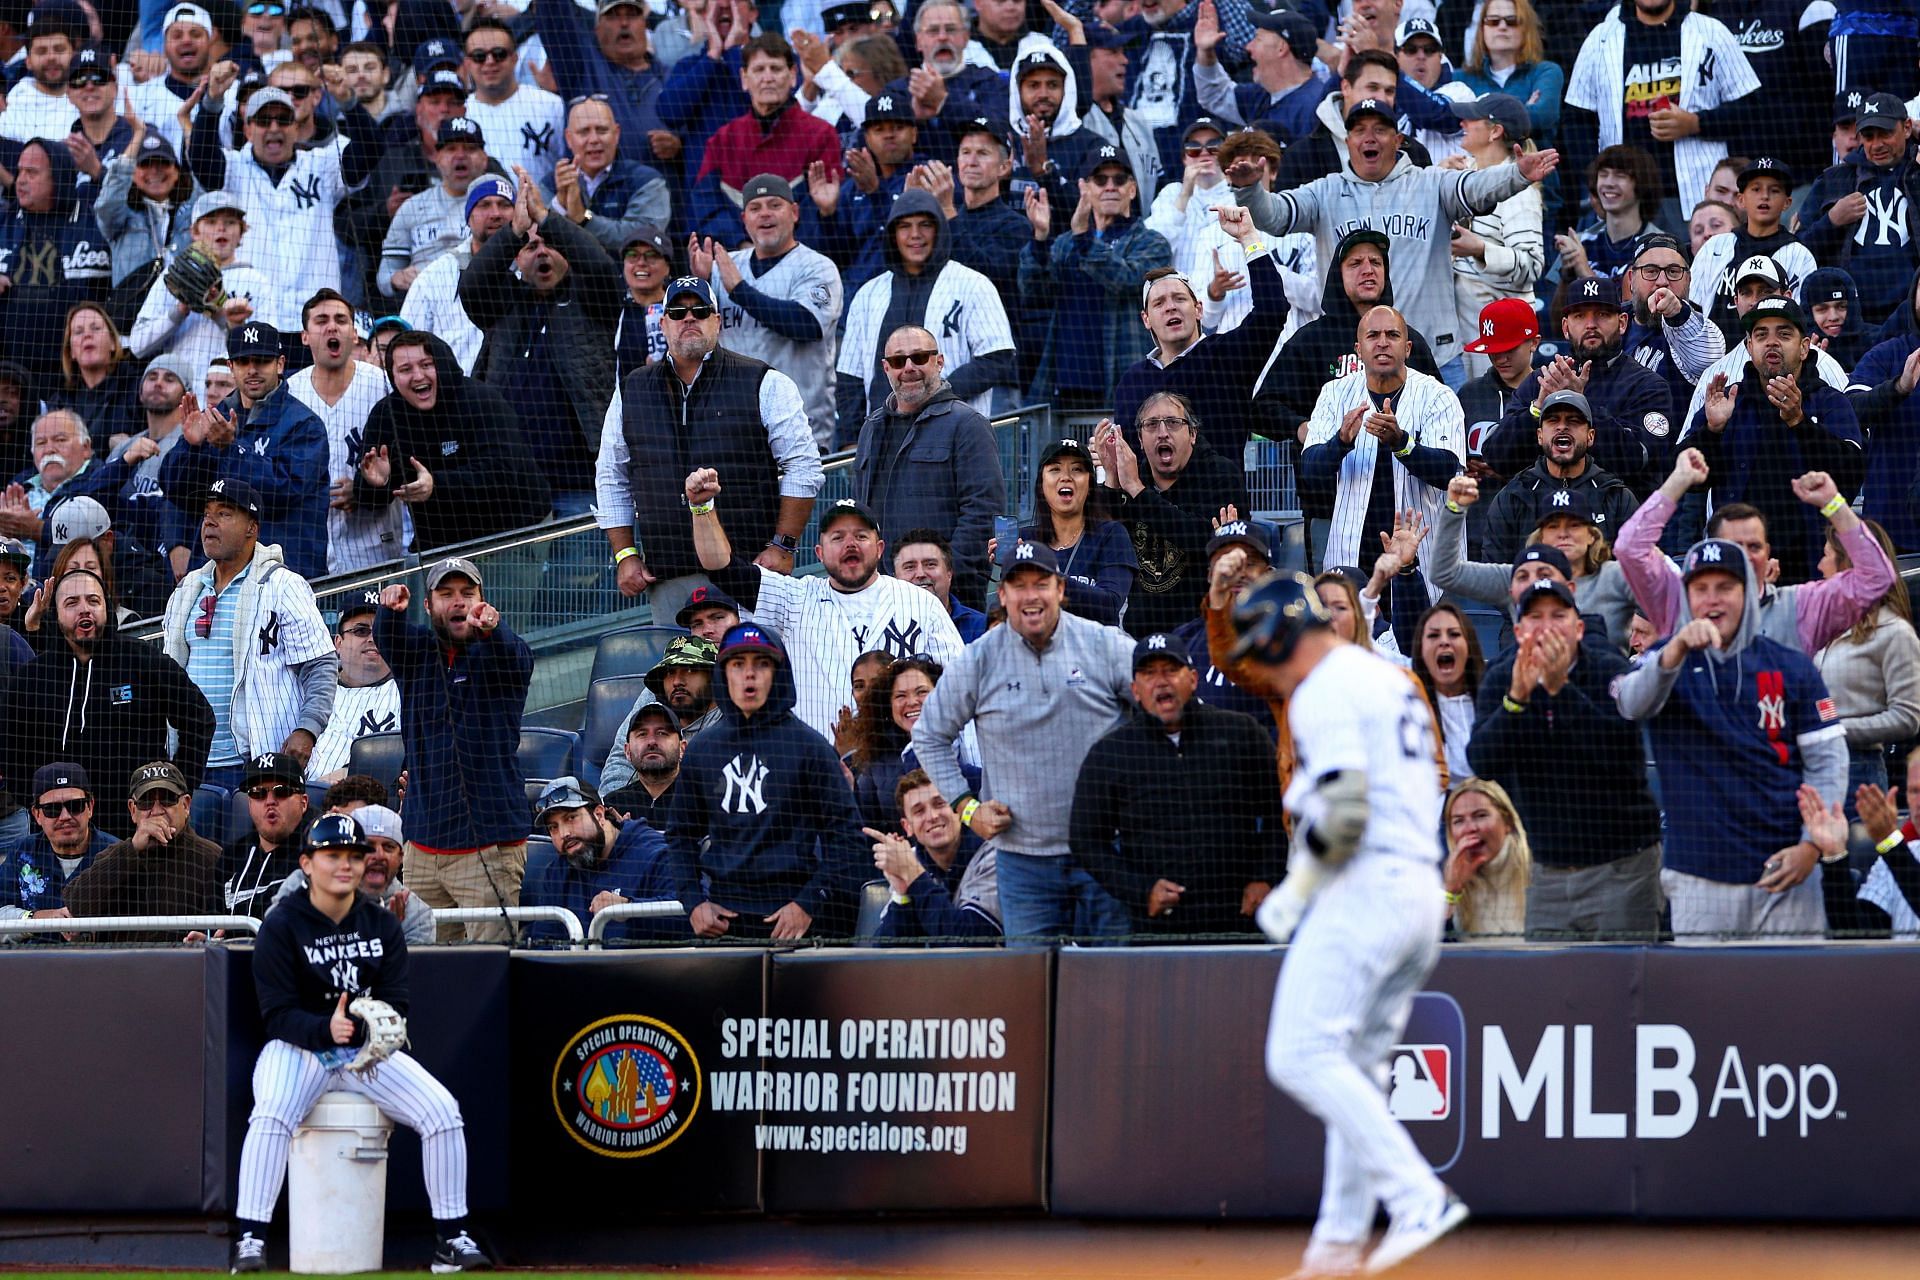 New York Yankees fans stunned by report that fan toxicity could